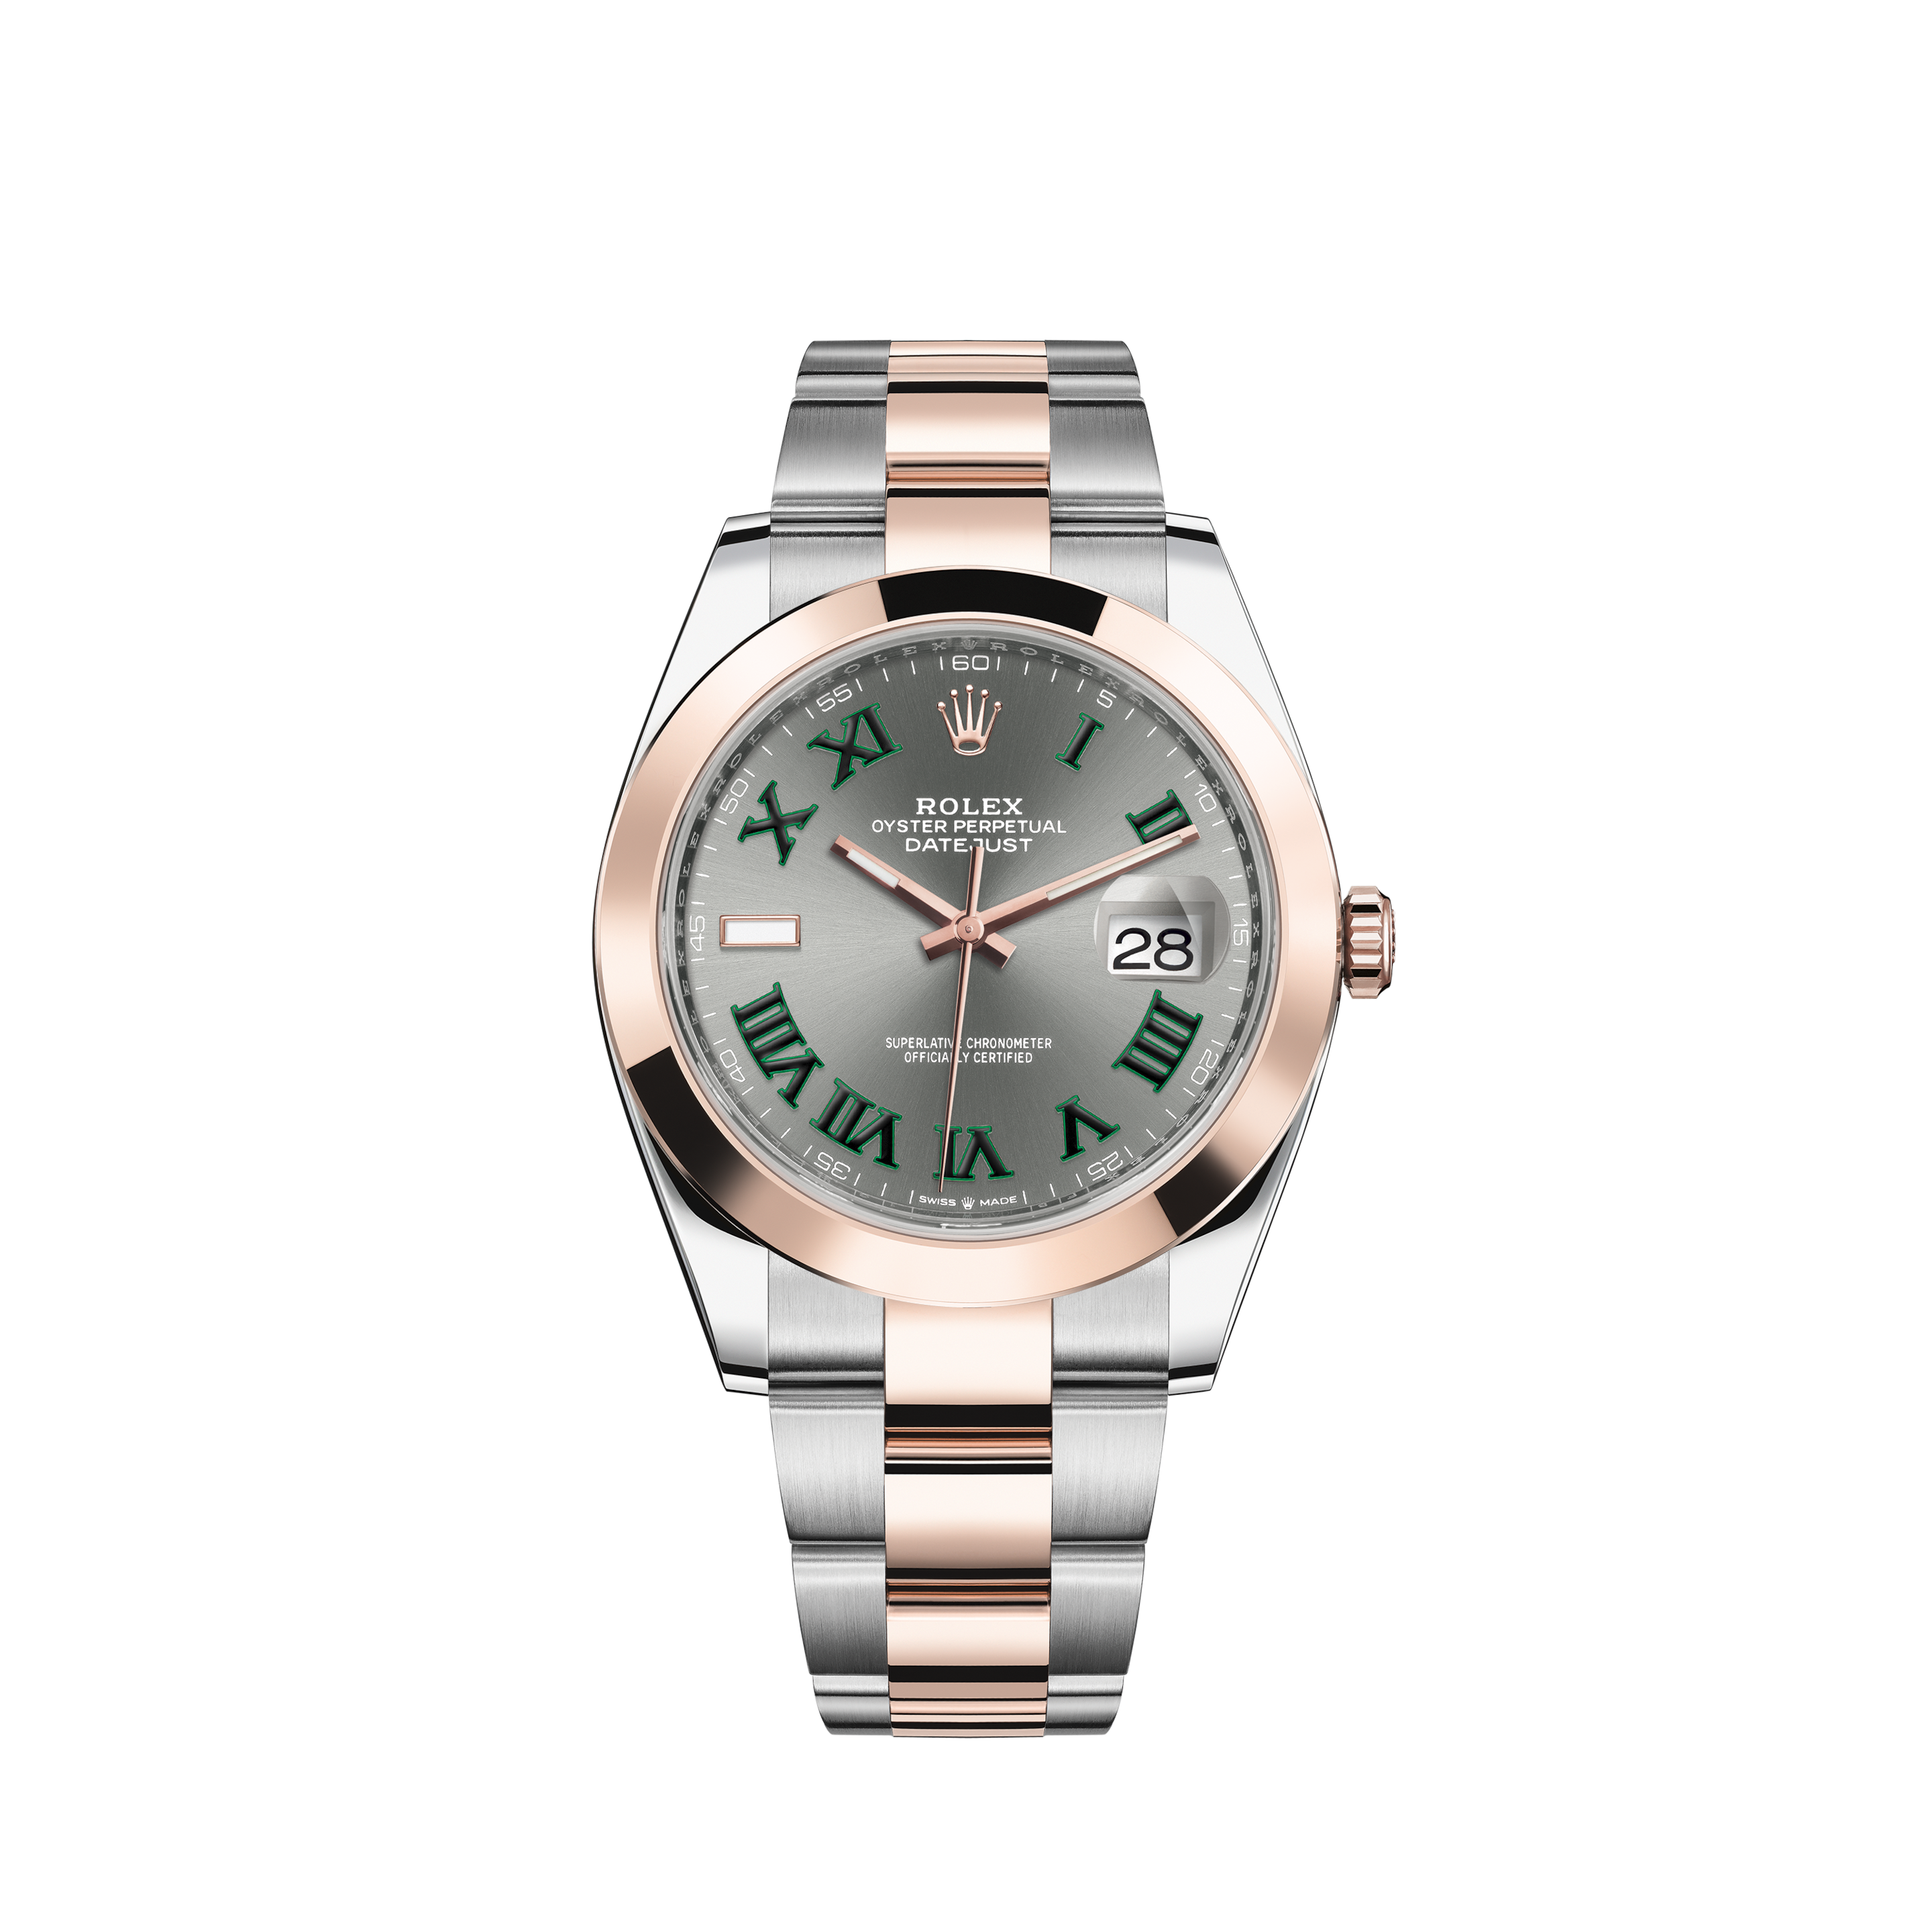 Rolex Datejust 28 Steel White Gold Pink Dial Ladies Watch 279174 Box CardRolex Datejust 28 Steel White Gold Slate Dial Ladies Watch 279174